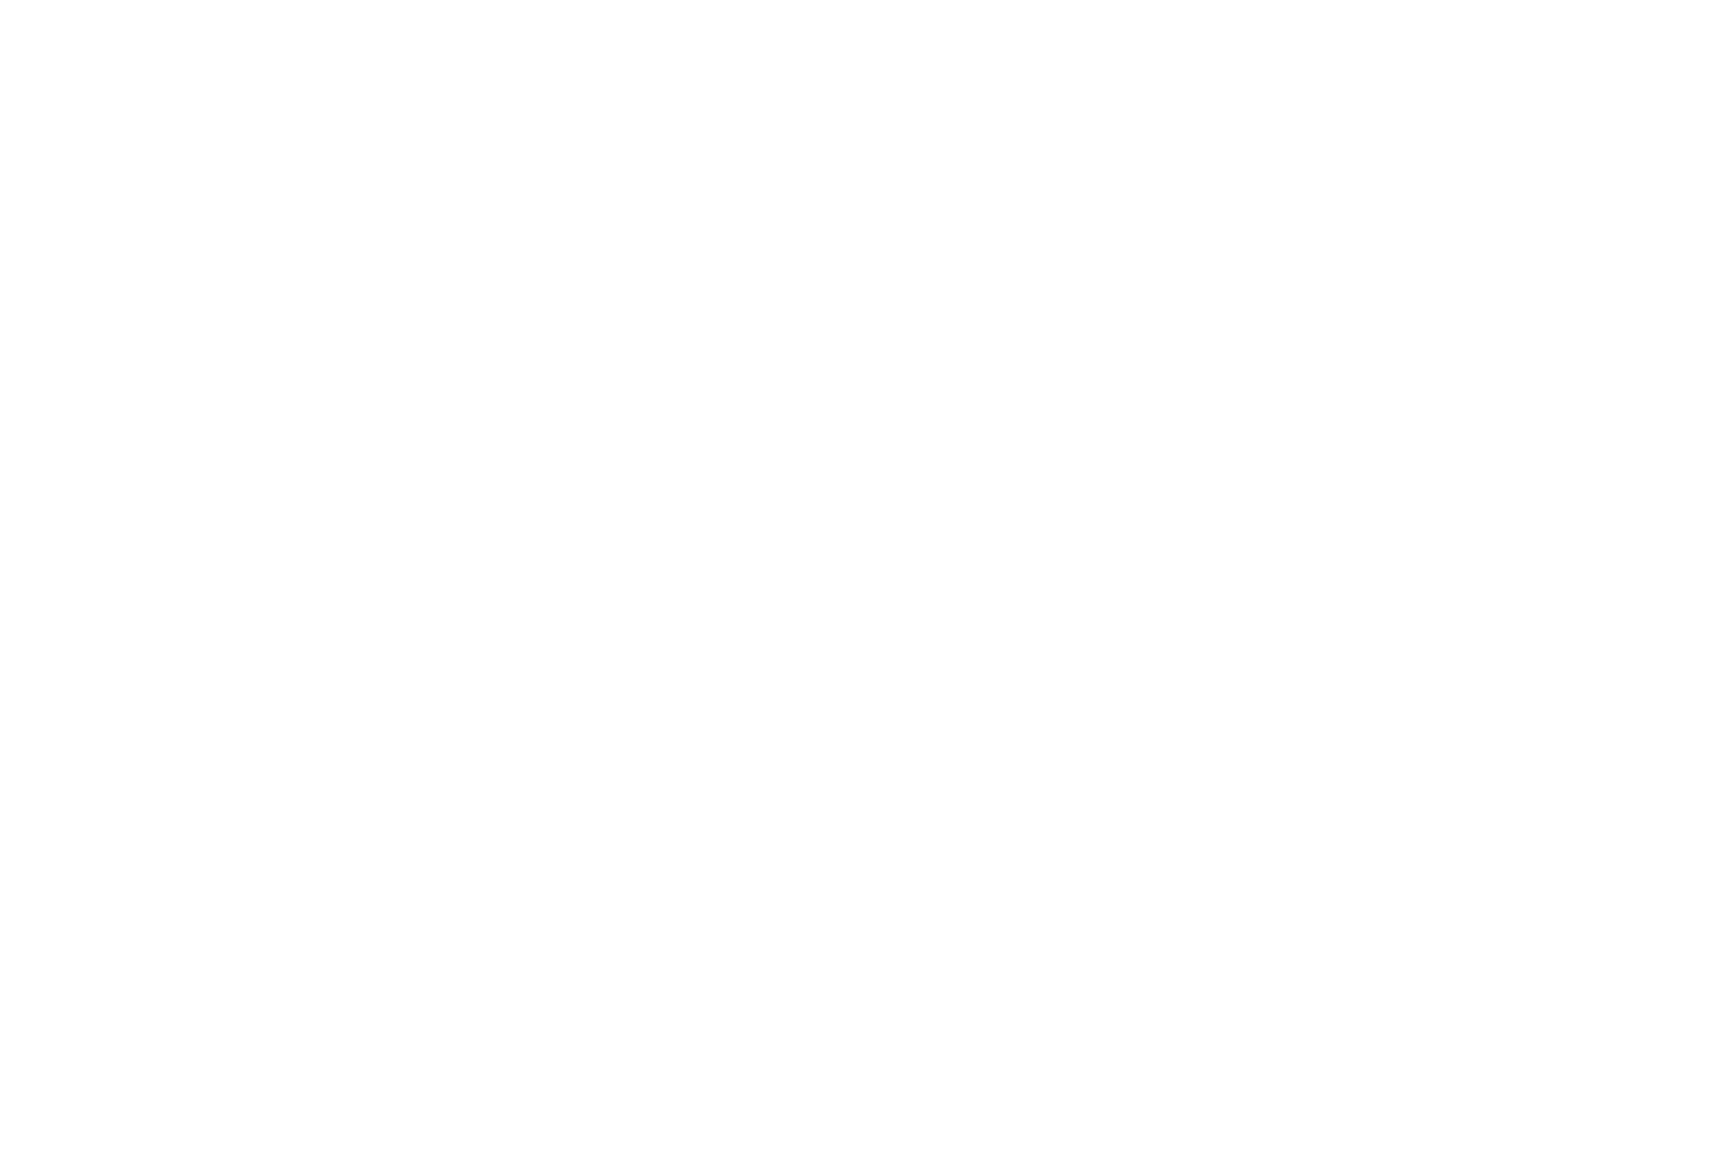 Laurel for Official Selection at Visionaria Film Festival awarded to 'Street Talk' in 2017